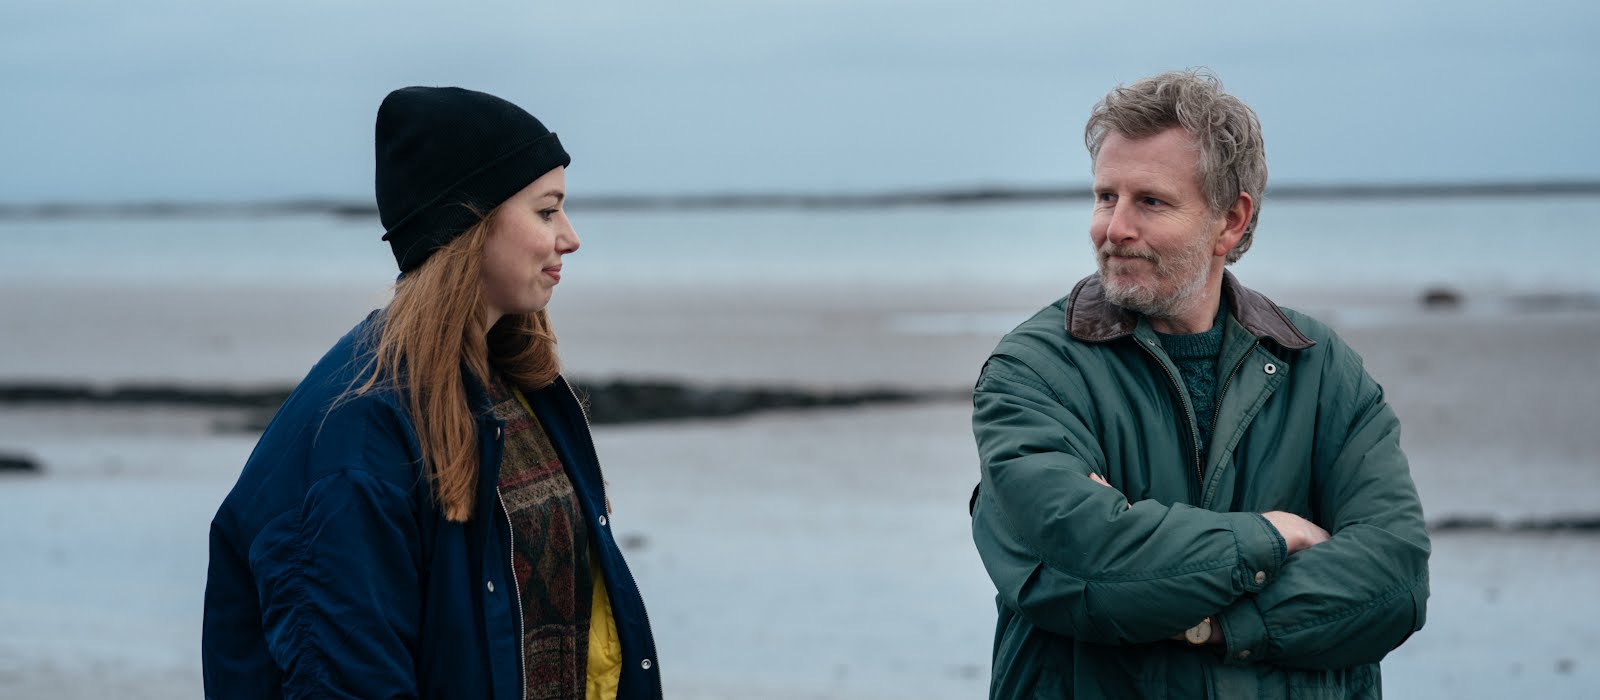 Ballywalter: A tender look at humanity, with cutting Irish humour to boot